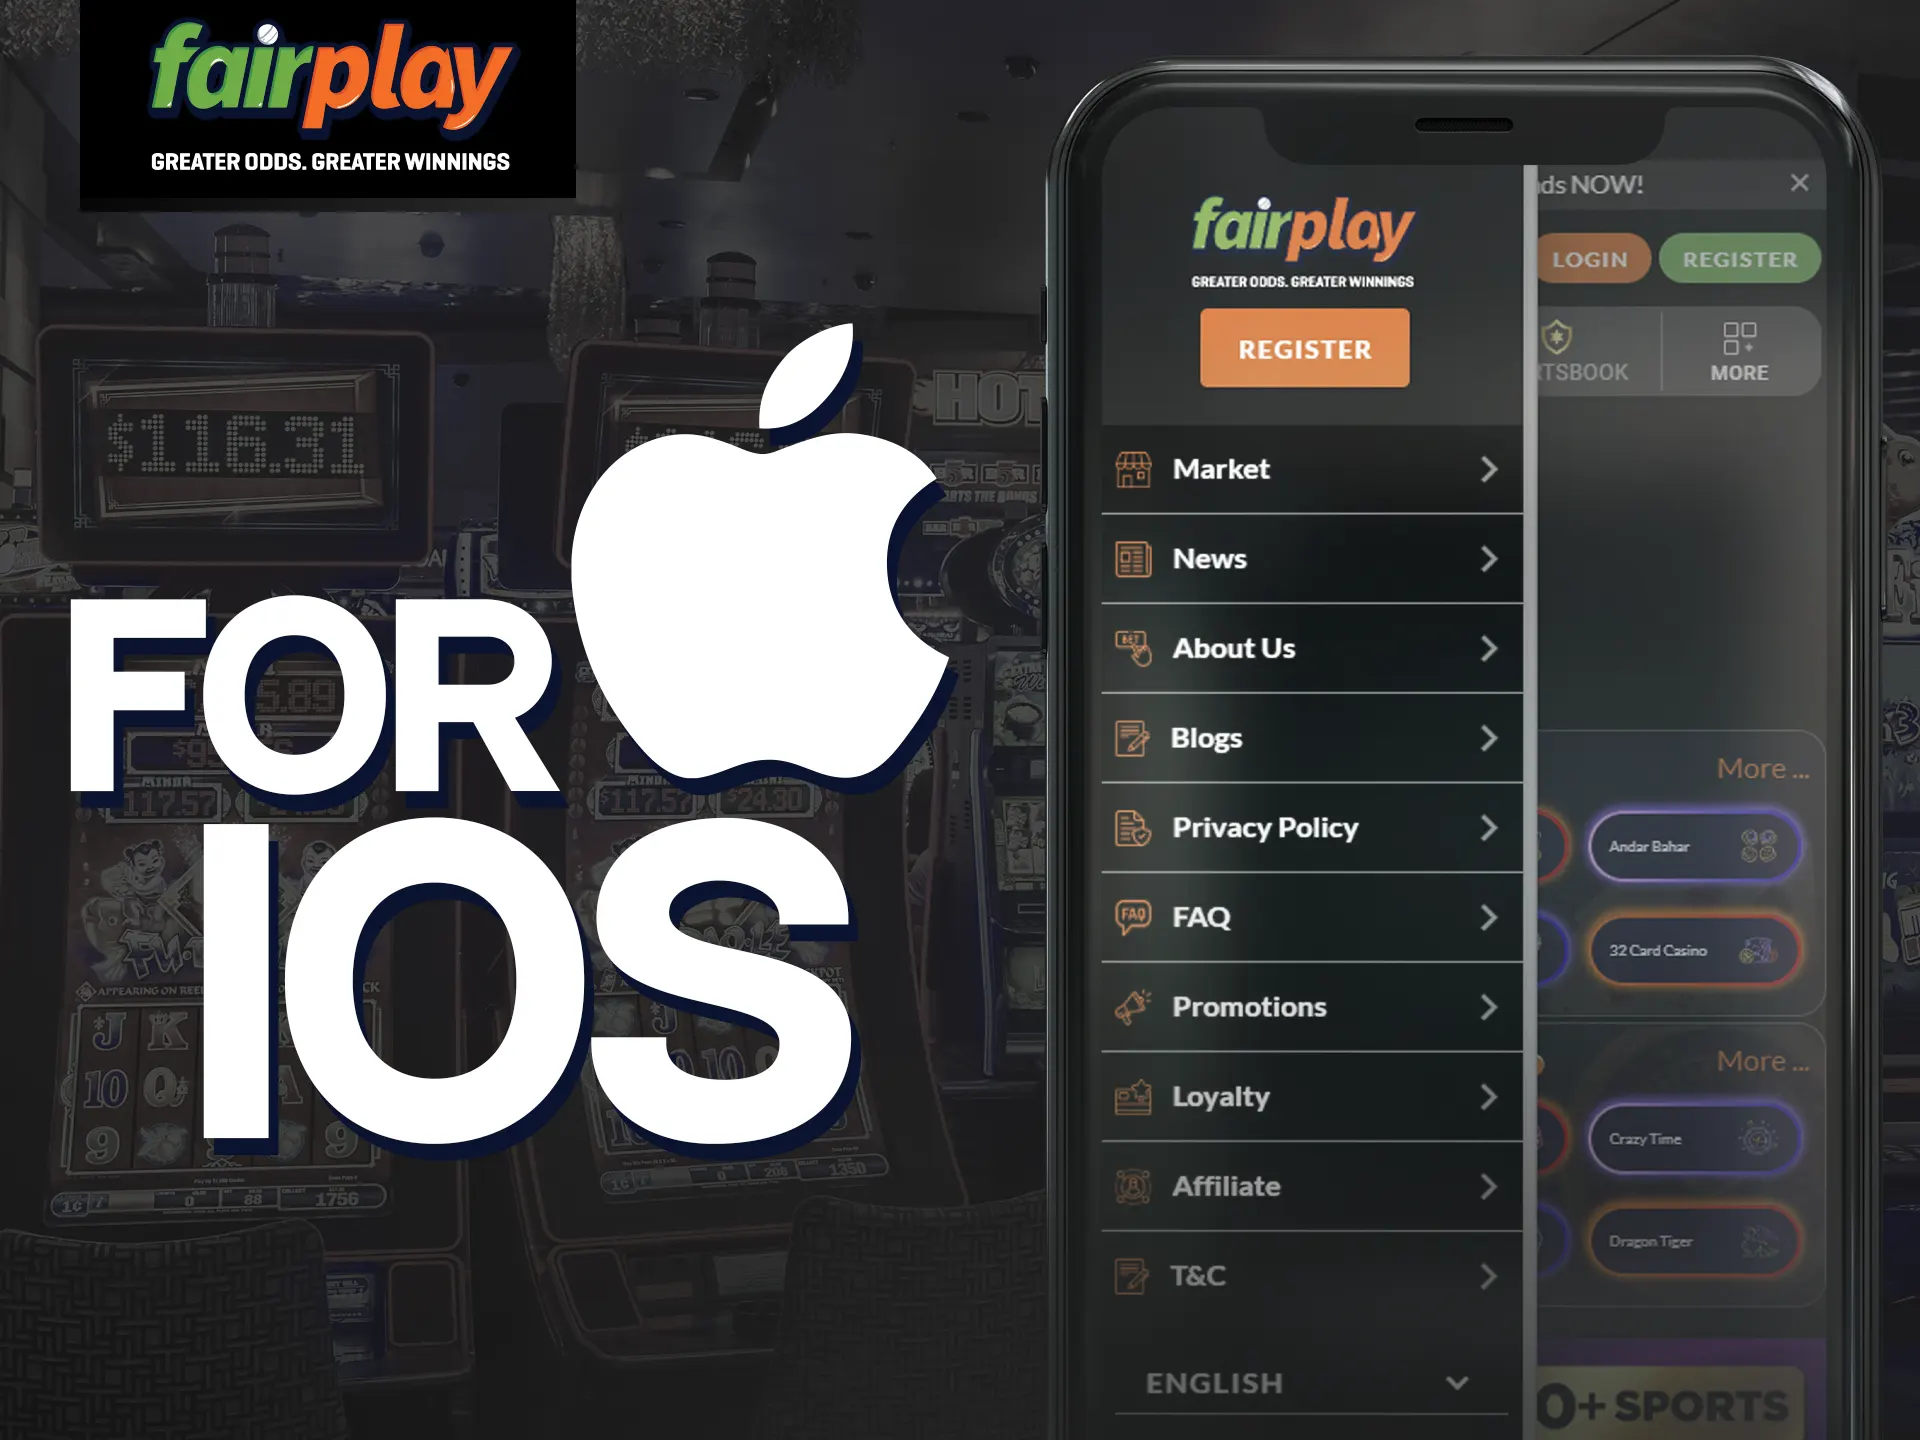 Fairplay is available also on iOS mobile devices.